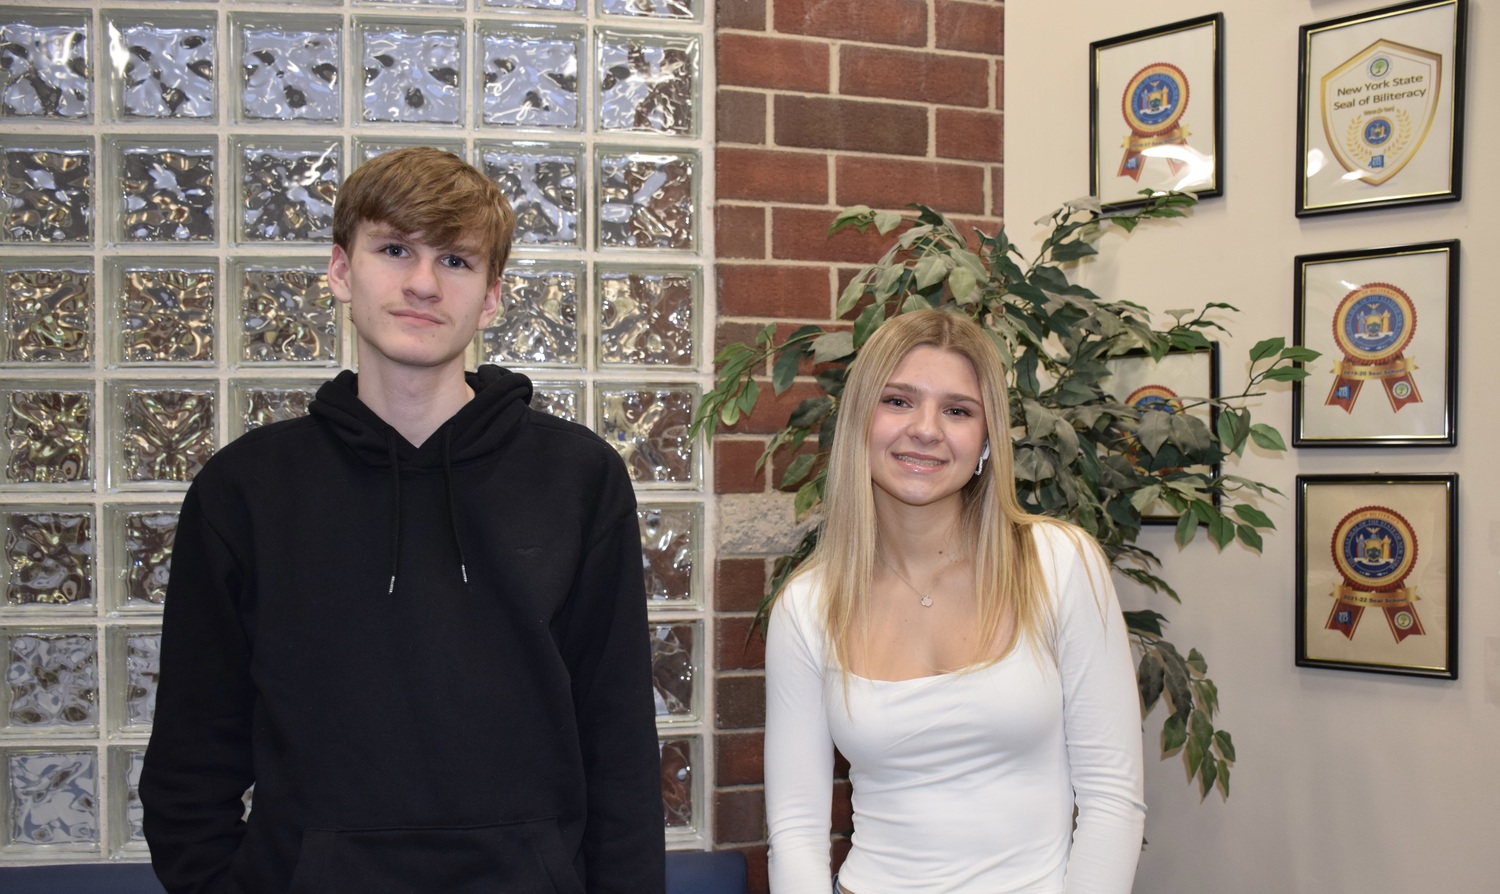 Eastport-South Manor Jr.-Sr. High School students Evan Hopkins and Hayden Sickles were named Employees of the Month for January by the BOCES Technical Center. COURTESY EASTPORT-SOUTH MANOR SCHOOL DISTRICT